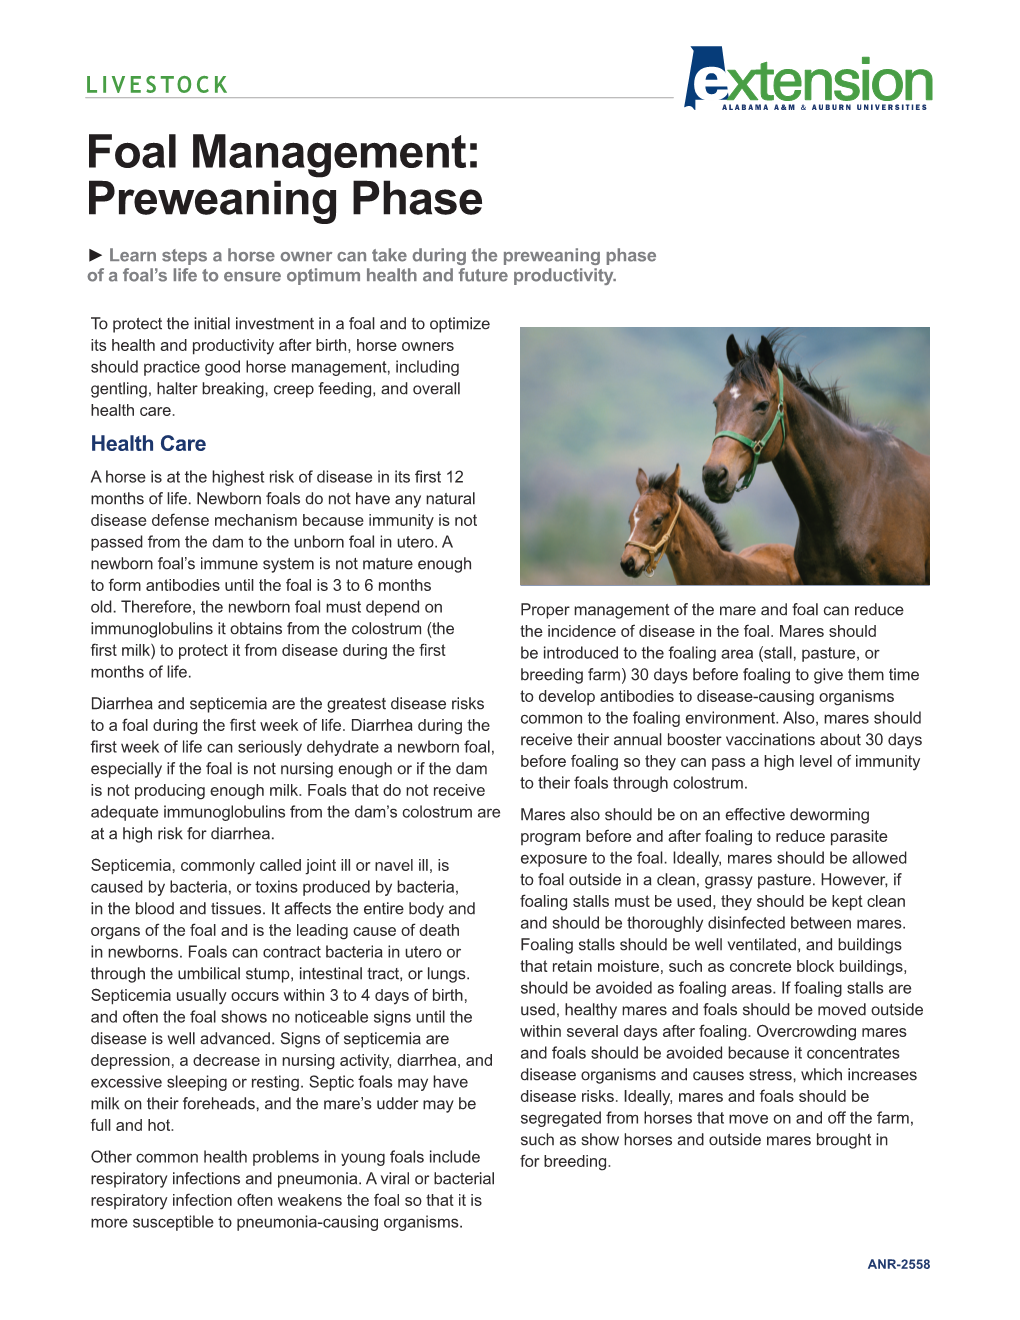 Foal Management: Preweaning Phase ► Learn Steps a Horse Owner Can Take During the Preweaning Phase of a Foal’S Life to Ensure Optimum Health and Future Productivity